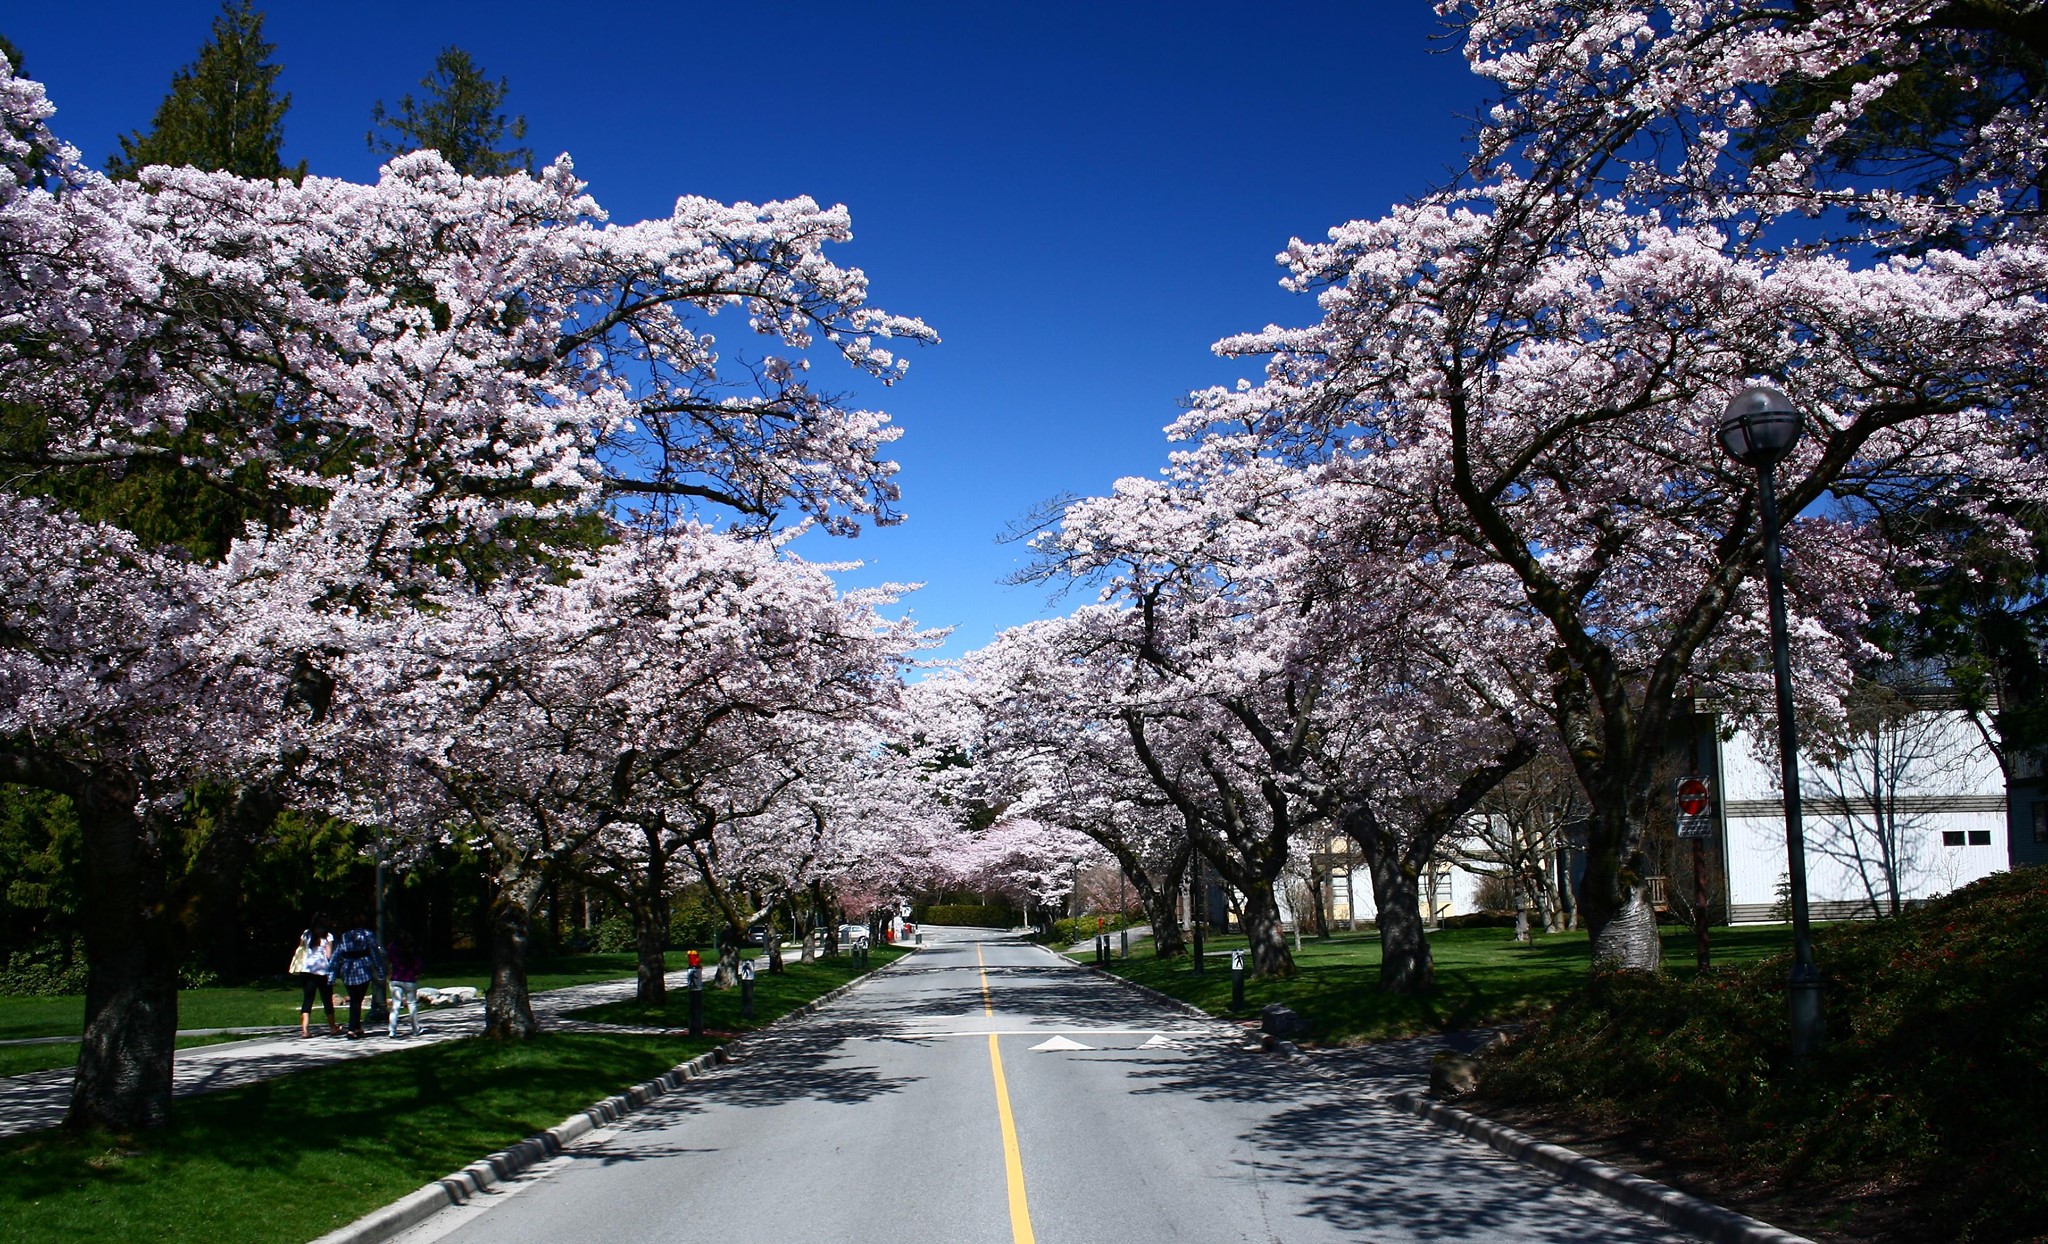 Best Places to see Cherry Blossoms in Canada, Vancouver BC